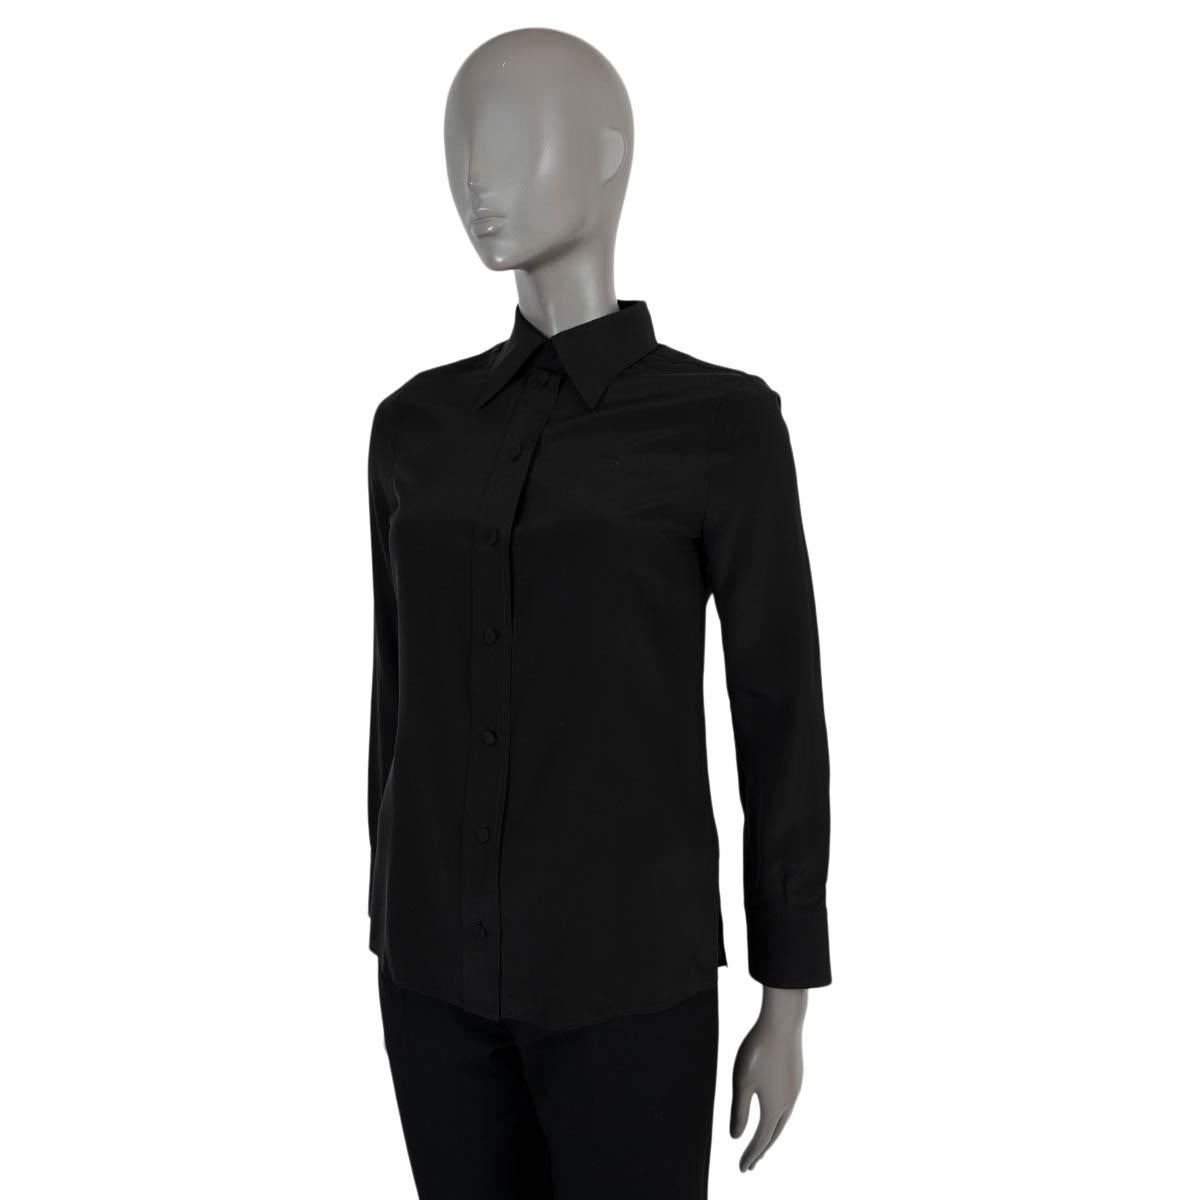 100% authentic Gucci crepe blouse in black silk (100%). Features GG embroidered at the chest and pointed collar. Closes with fabric covered buttons on the front. Has been worn and is in excellent condition.

2020 Pre-Fall

Measurements
Tag